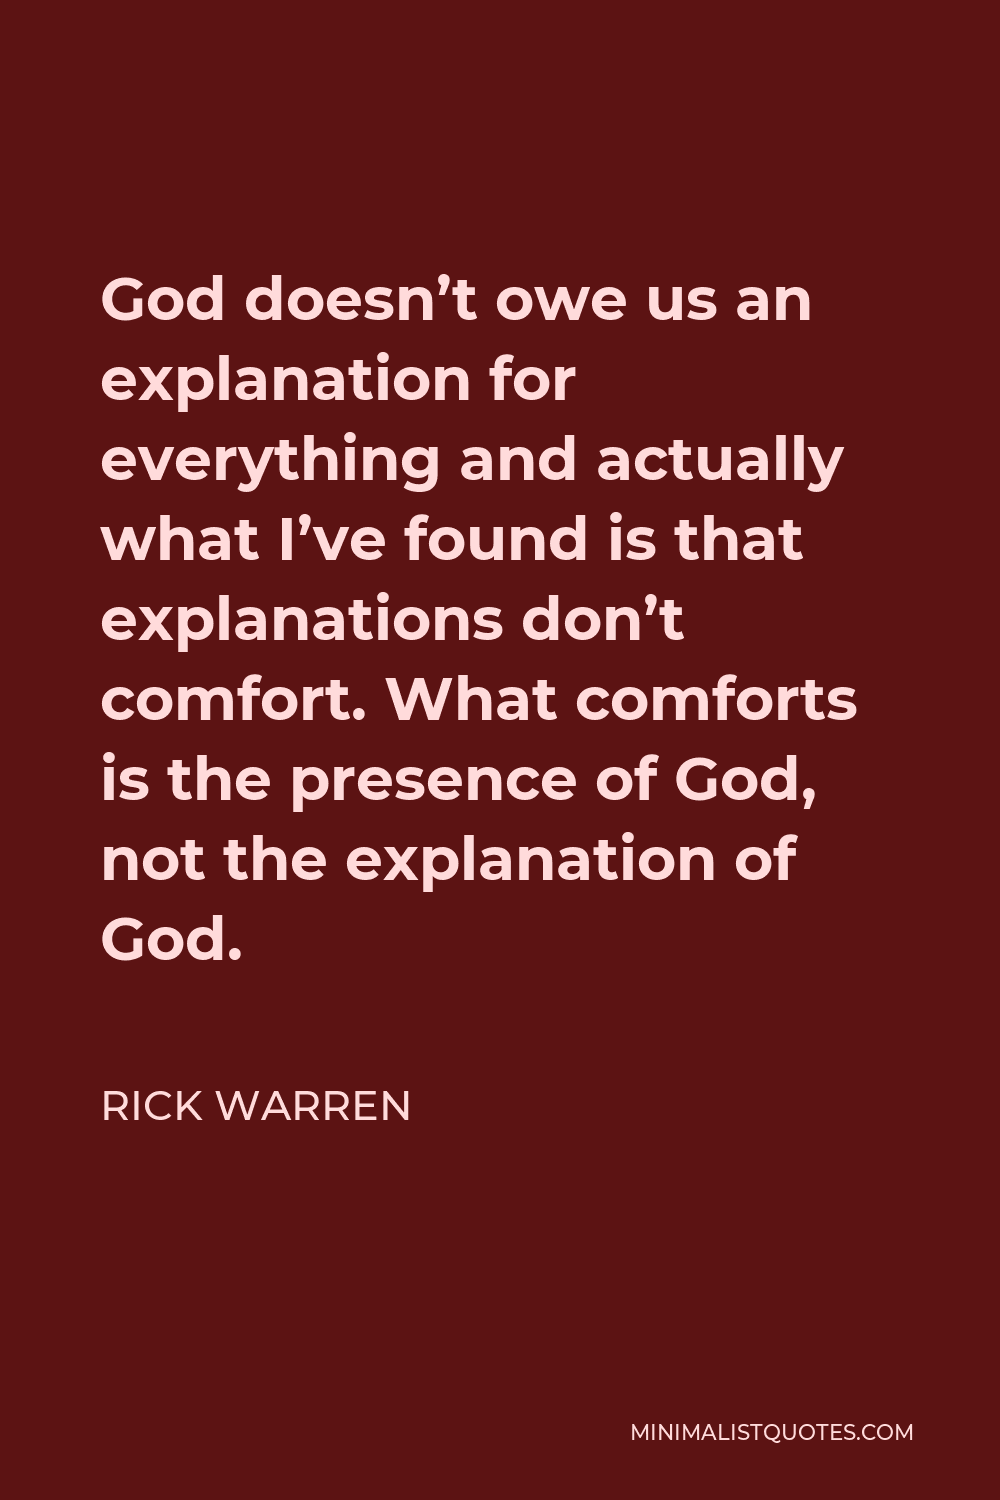 Rick Warren Quote - God doesn’t owe us an explanation for everything and actually what I’ve found is that explanations don’t comfort. What comforts is the presence of God, not the explanation of God.